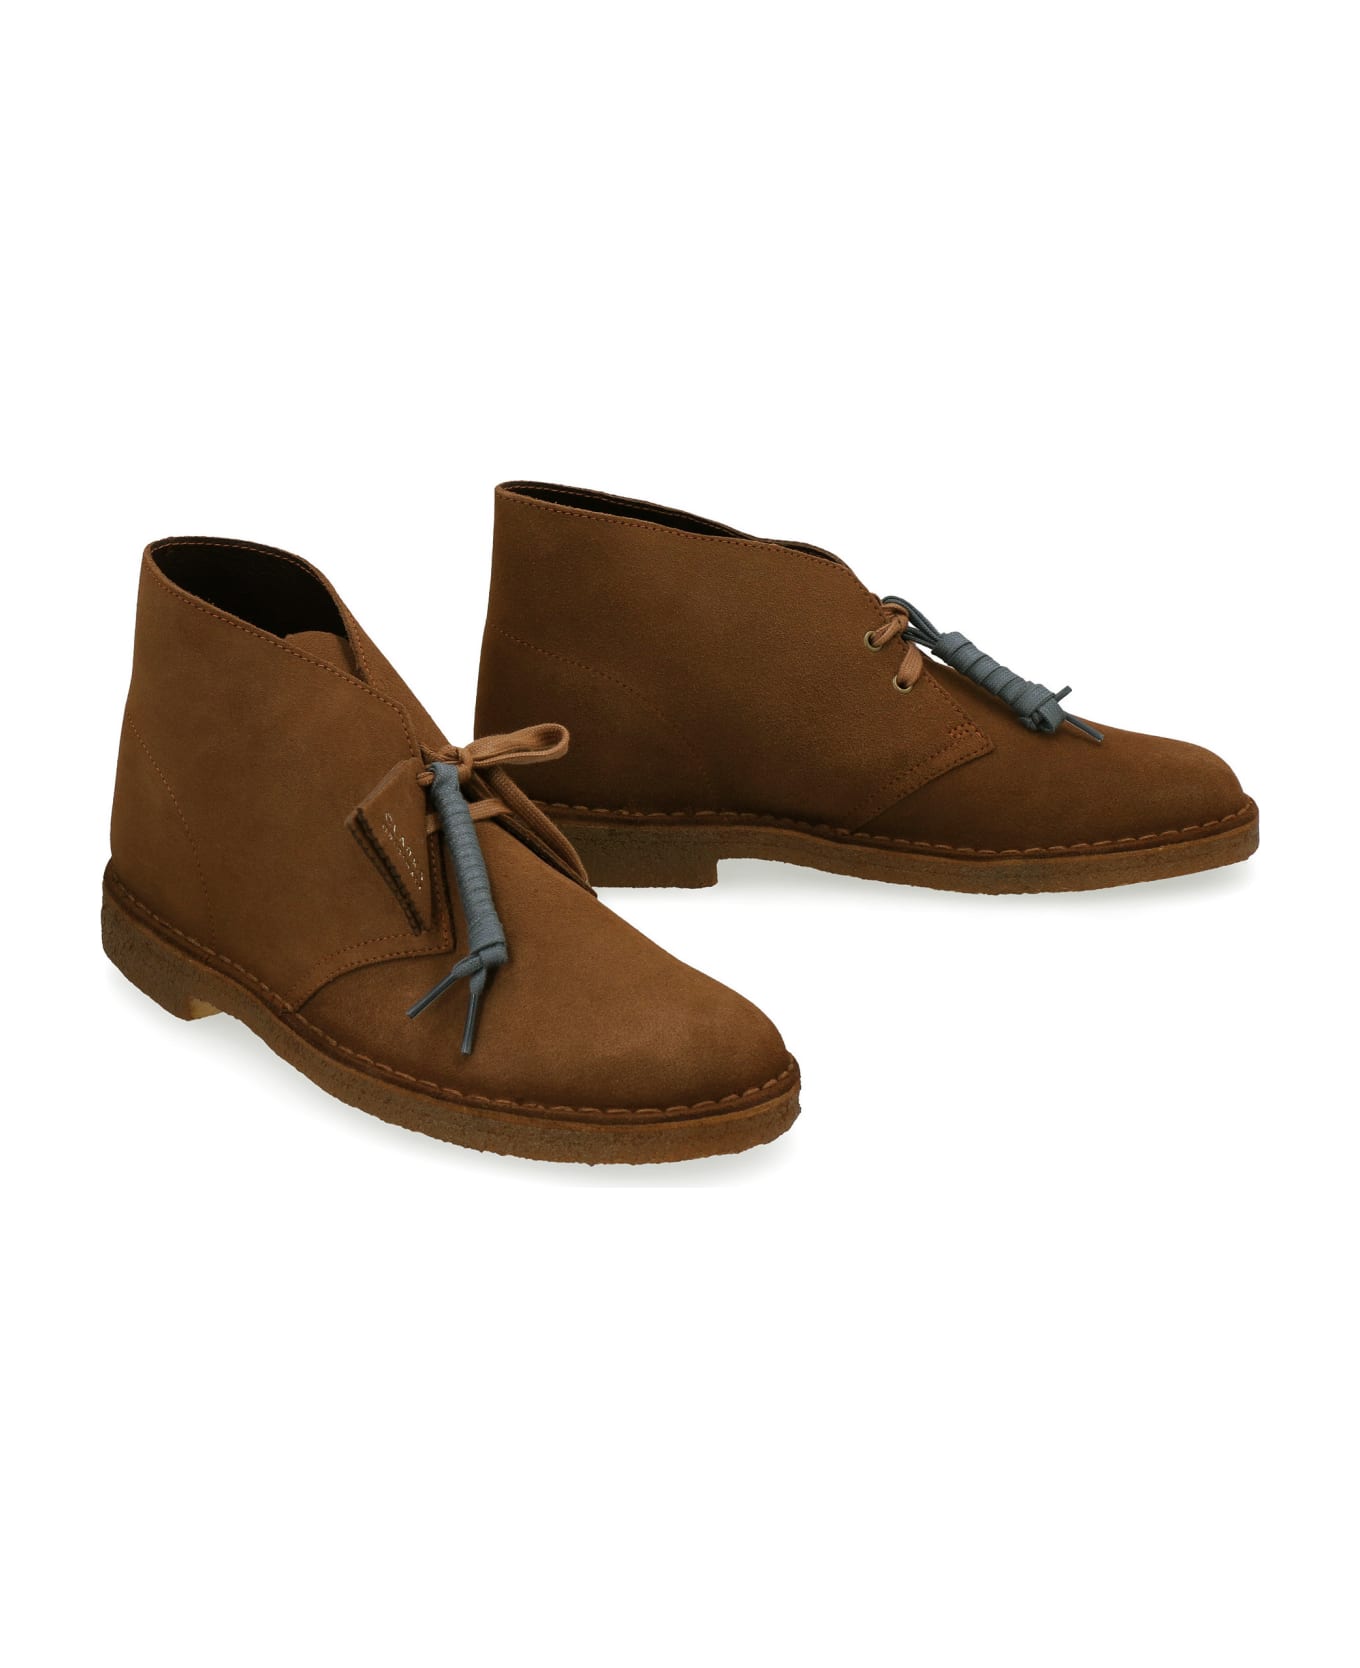 Clarks Suede Desert Boots - Saddle Brown ローファー＆デッキシューズ